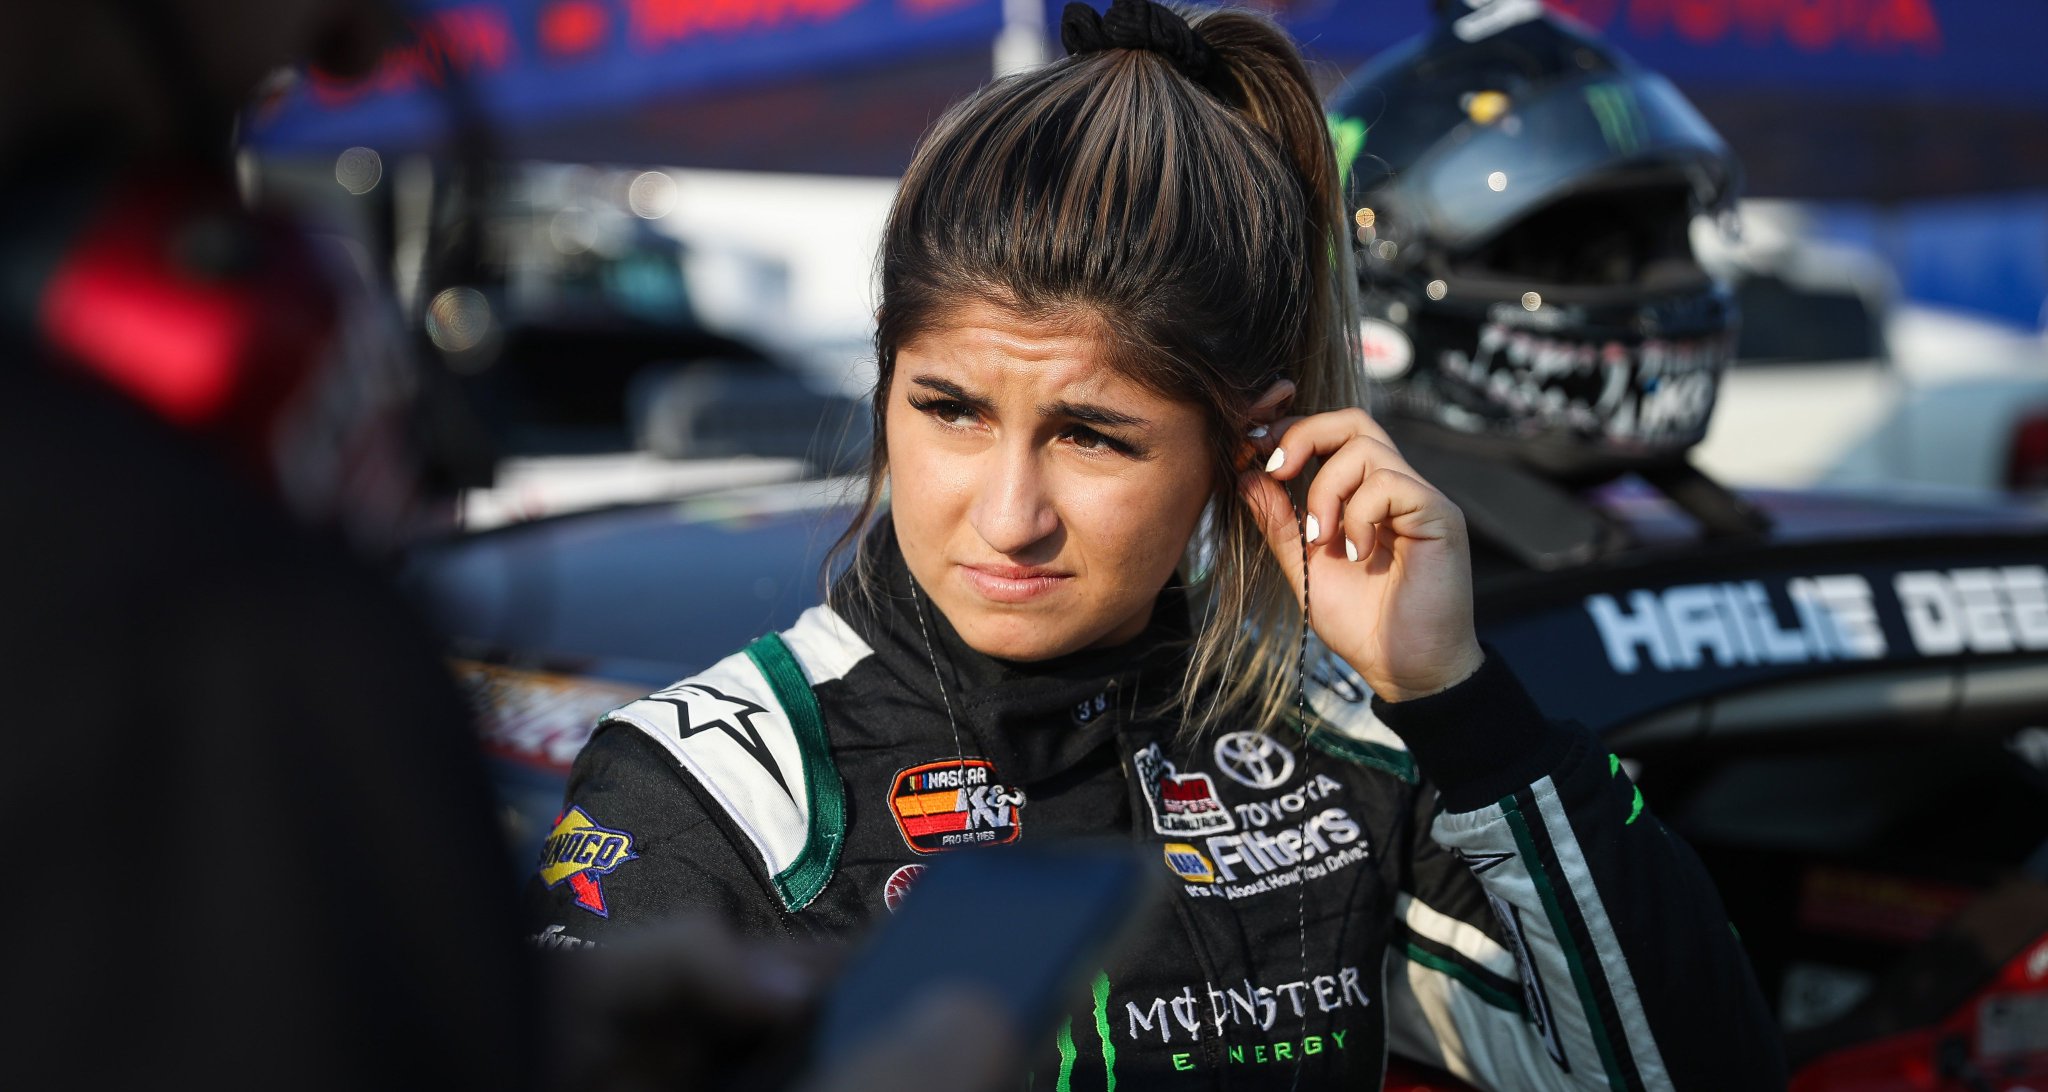 “#KNWEST [QUALIFYING] Hailie Deegan Earns Fifth Career Pole With Quick Rose...